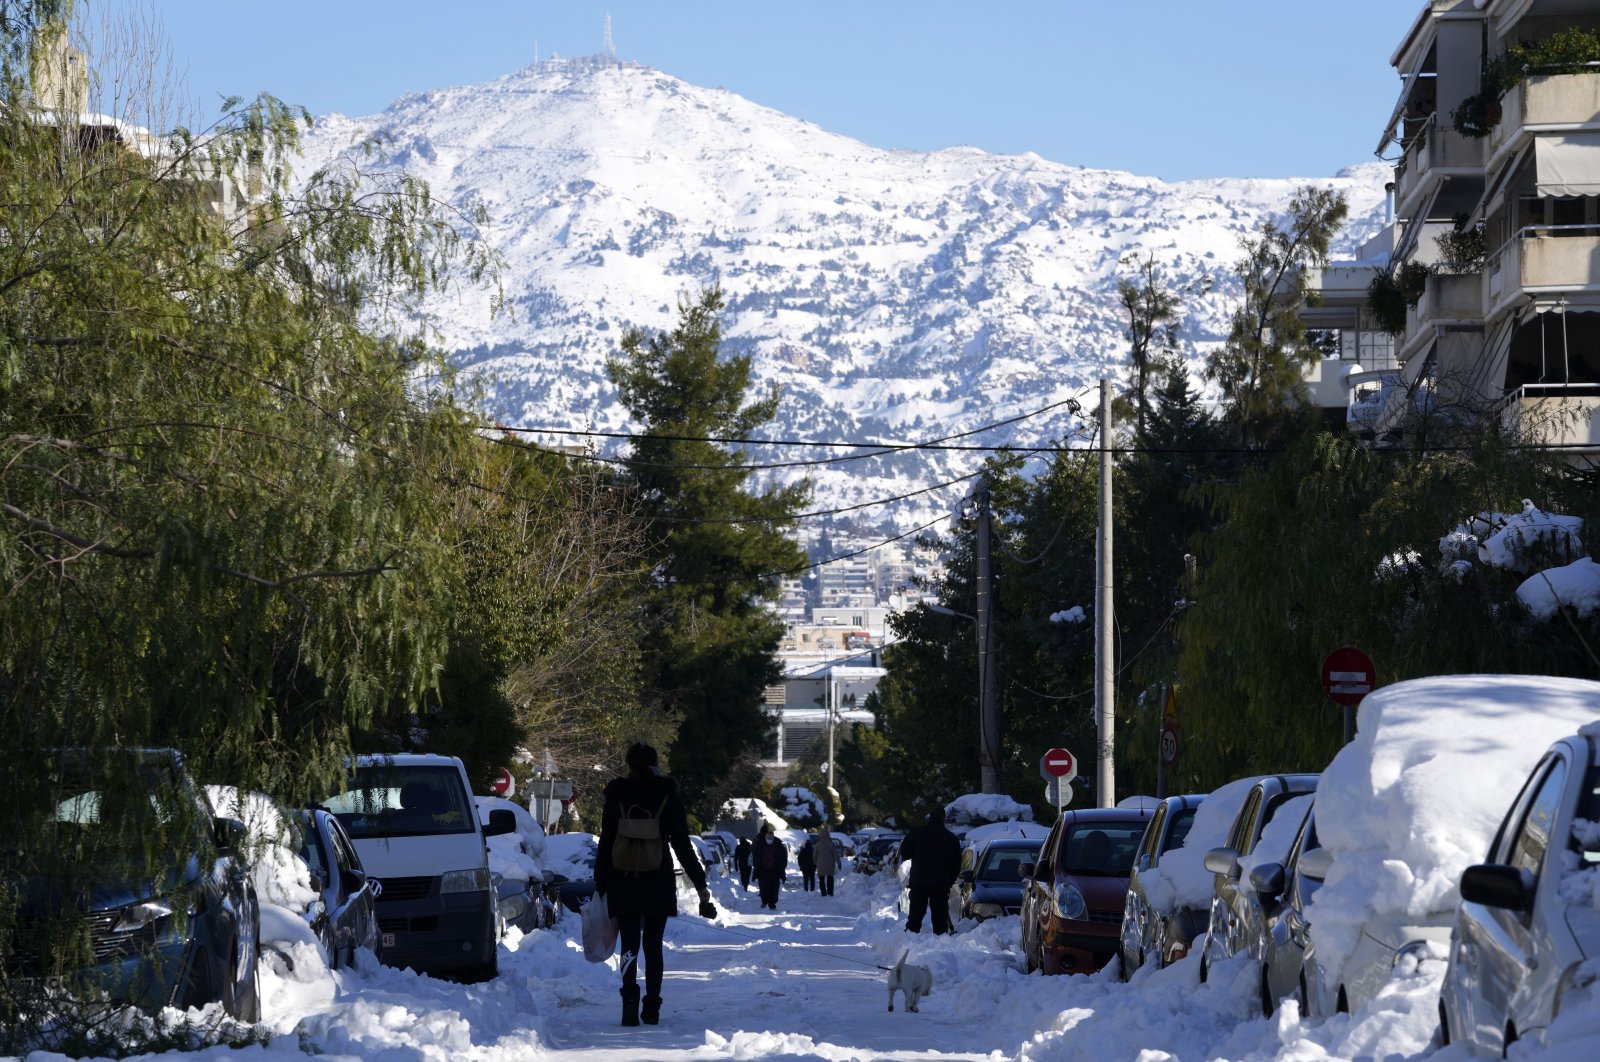 People walk on a frozen road after a snowstorm as Penteli mountain is seen in the background, in northern Athens, Greece, Jan. 26, 2022. (AP Photo)